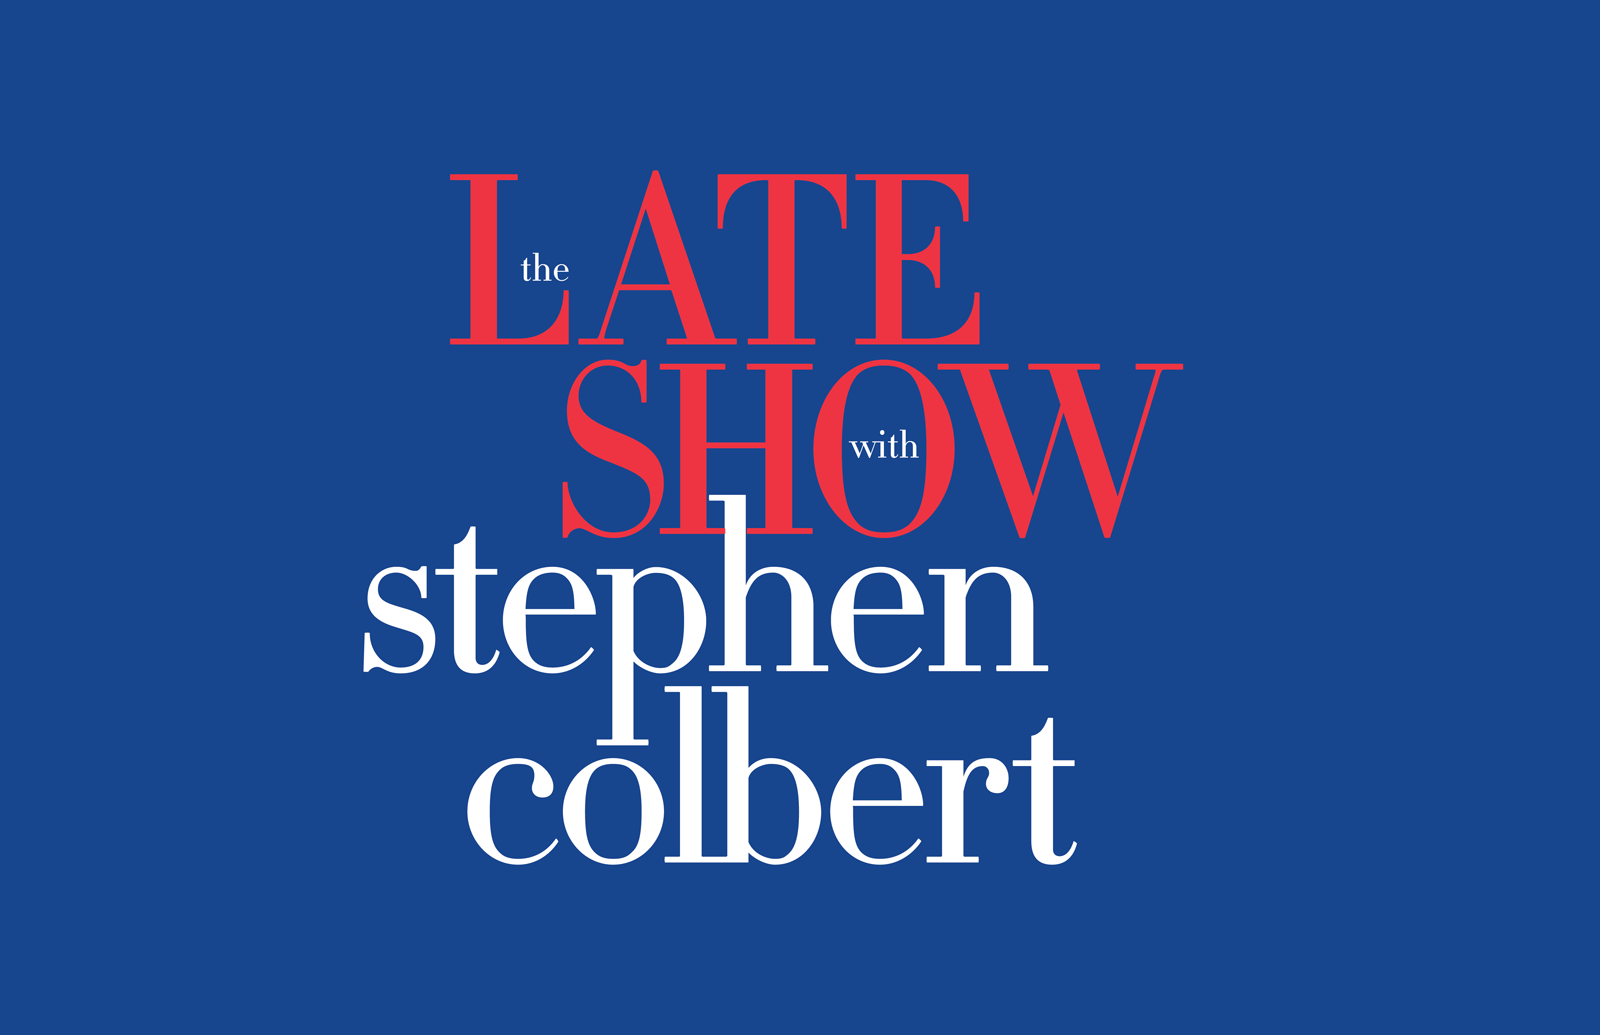 THE LATE SHOW WITH STEPHEN COLBERT poster